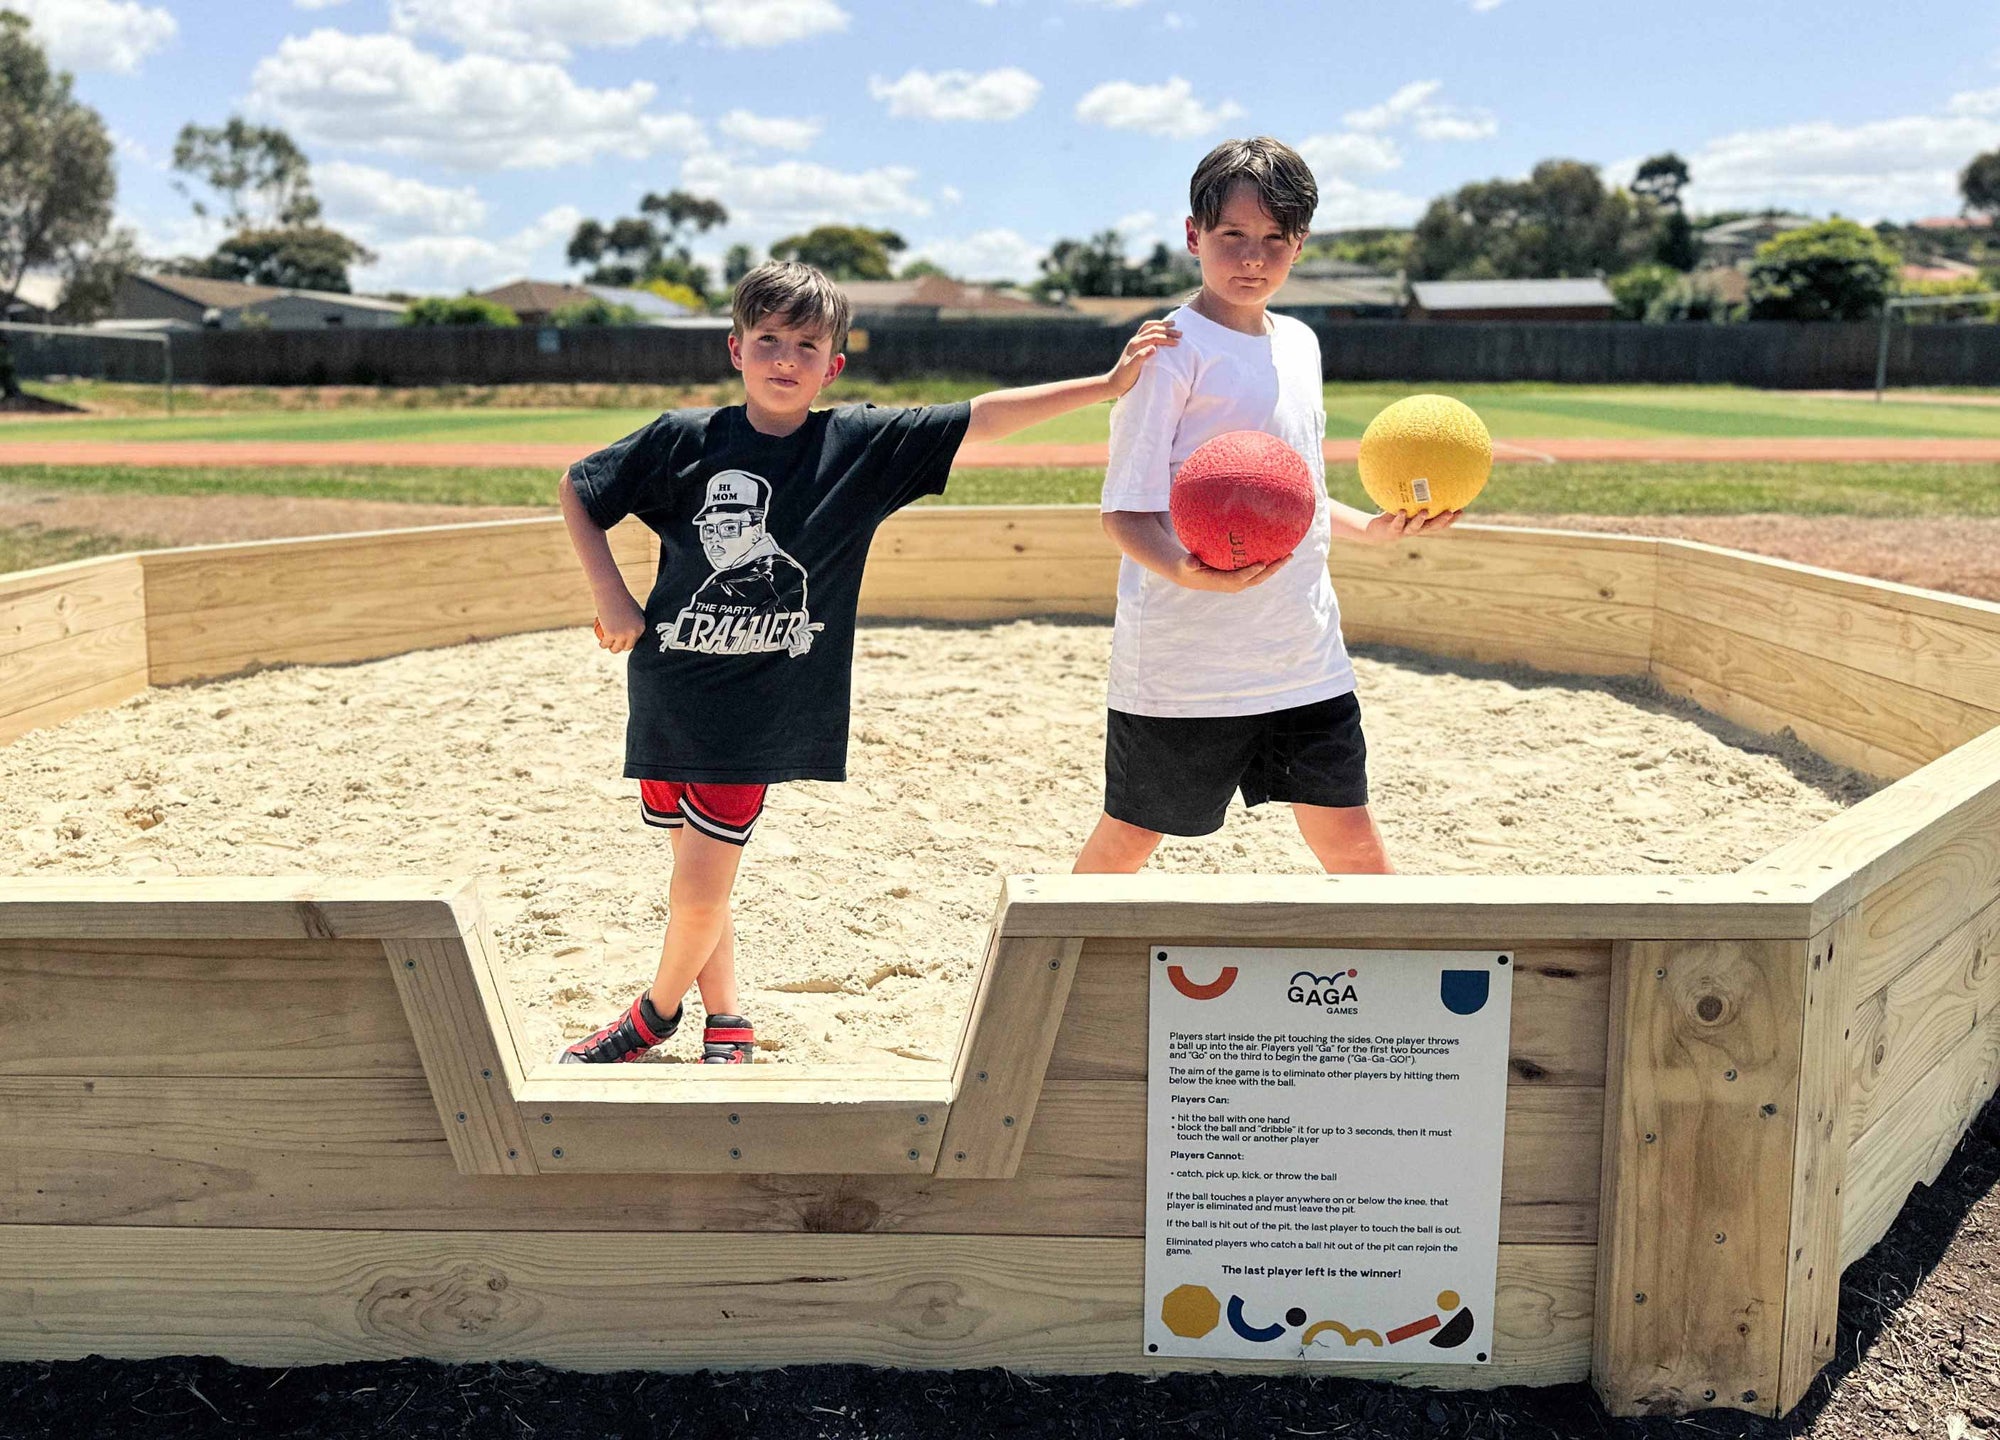 Two children standing seriously in a Gaga Ball Pit, one is holding a Gaga ball, ready to play, posing for the camera.